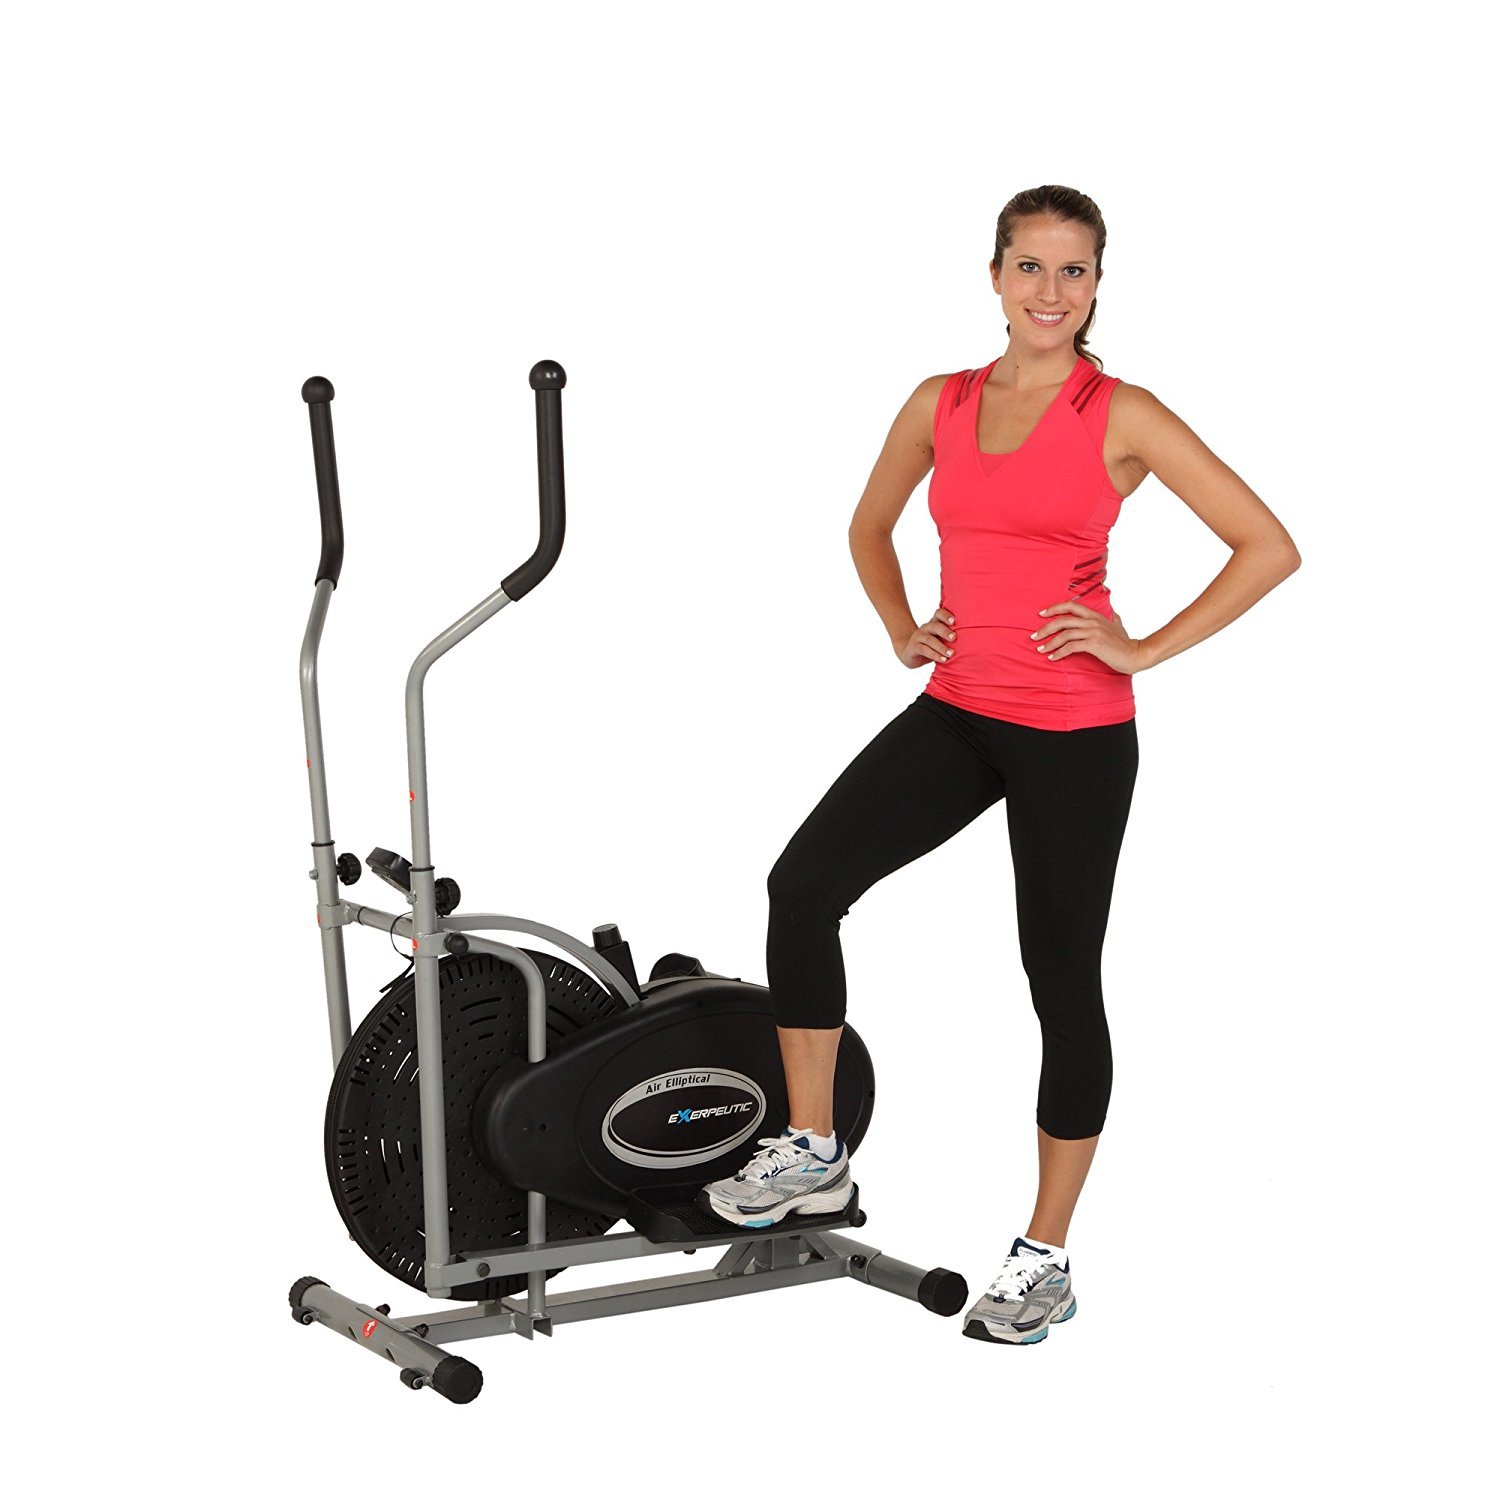 sit back and enjoy the Exerpeutic Aero Air Elliptical indicated here